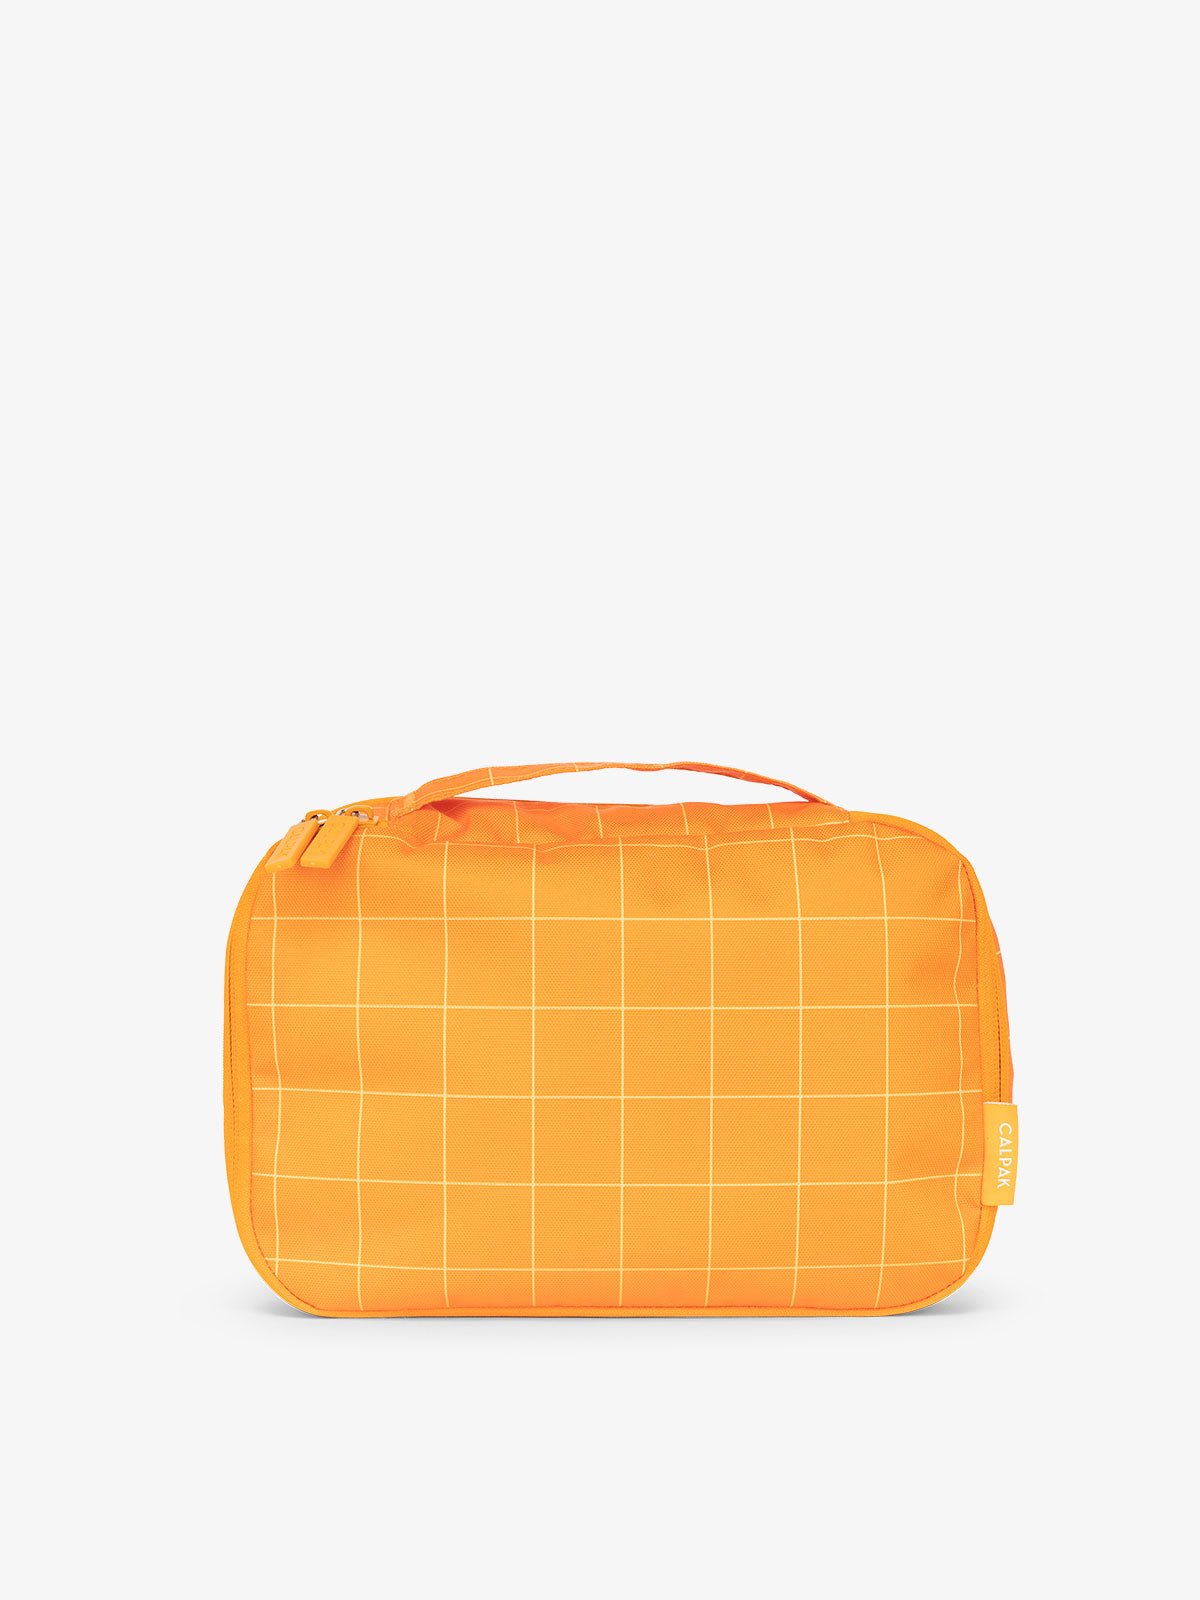 CALPAK small packing cubes with top handle in orange